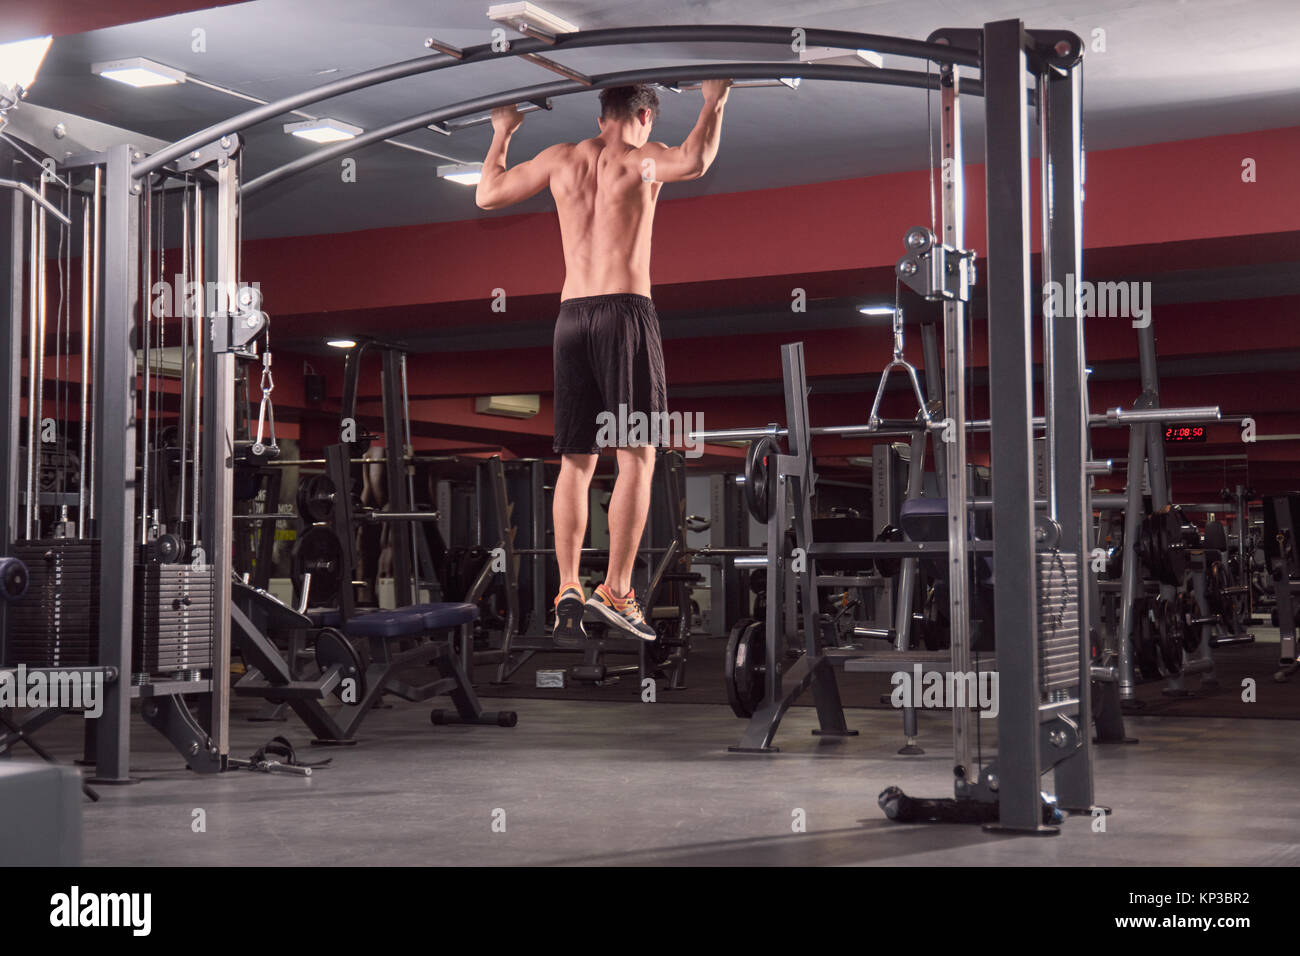 one young man, Multi-Station Gym Machine, back exercise, rear view, dark gym indoors, full lenght body shot. Stock Photo